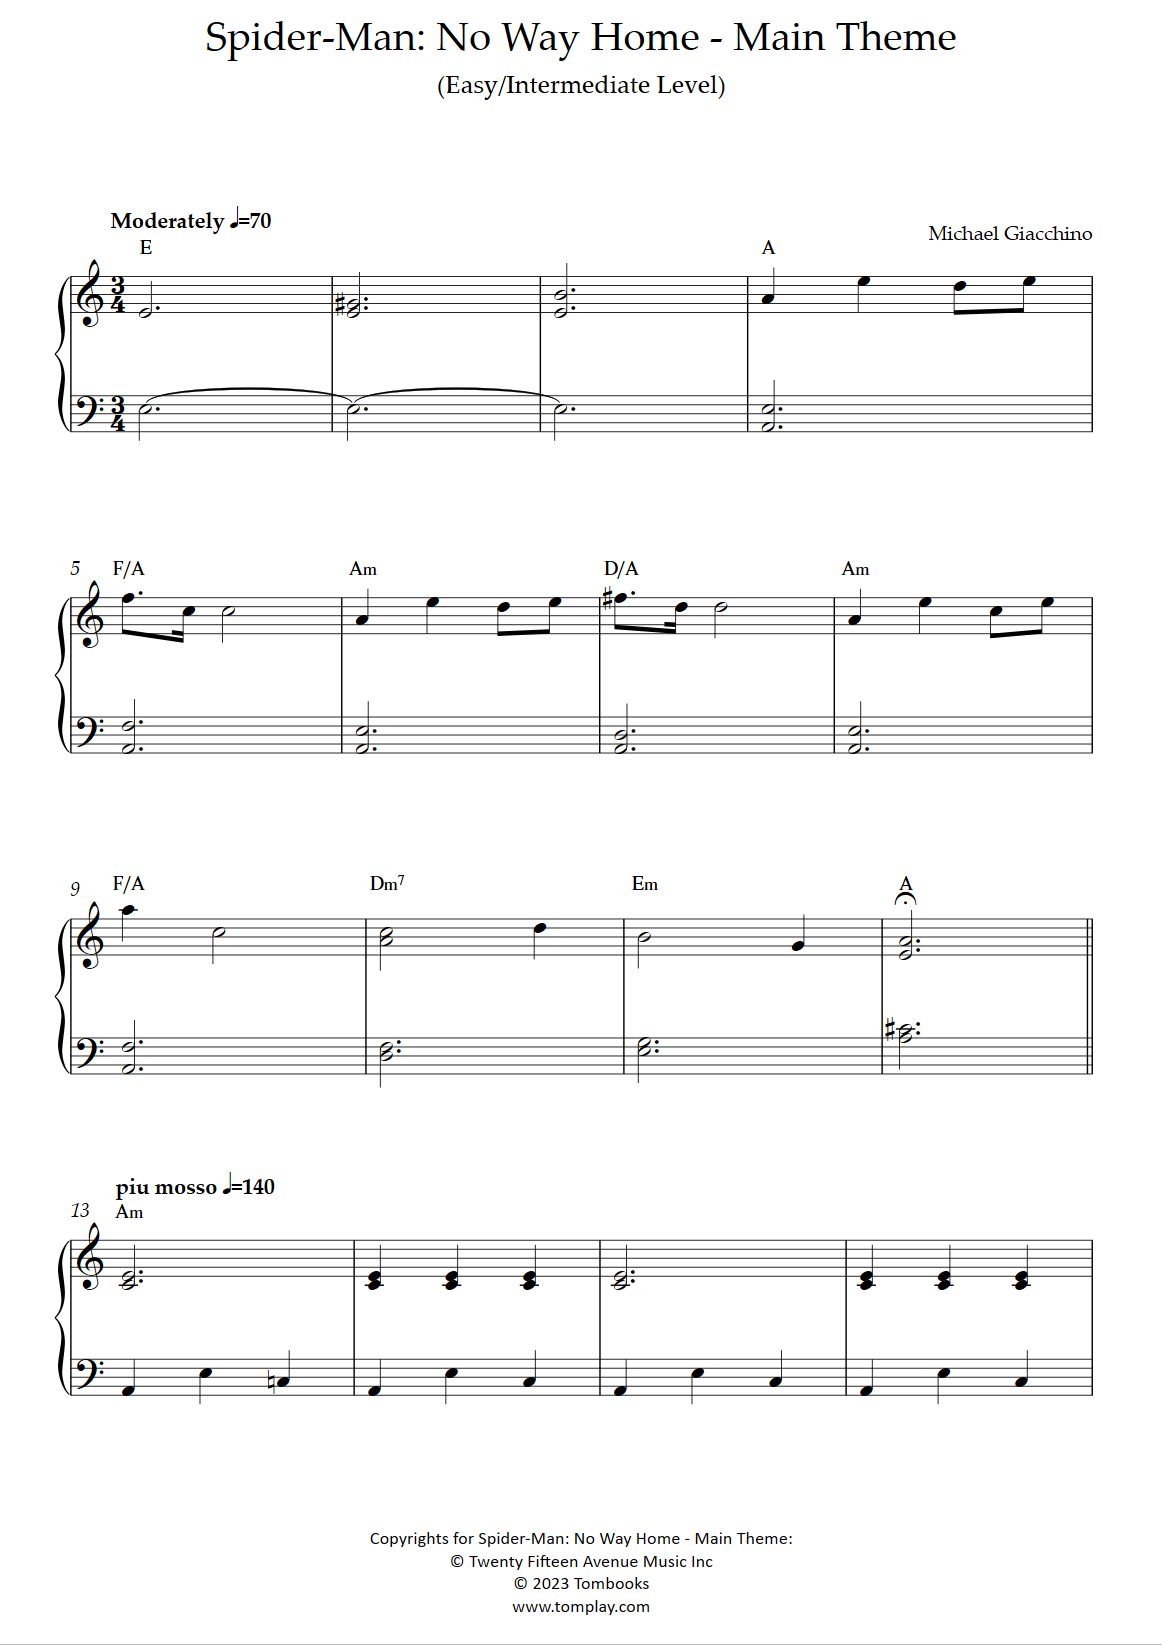 Spider-Man: No Way Home (Main Theme) sheet music for piano solo